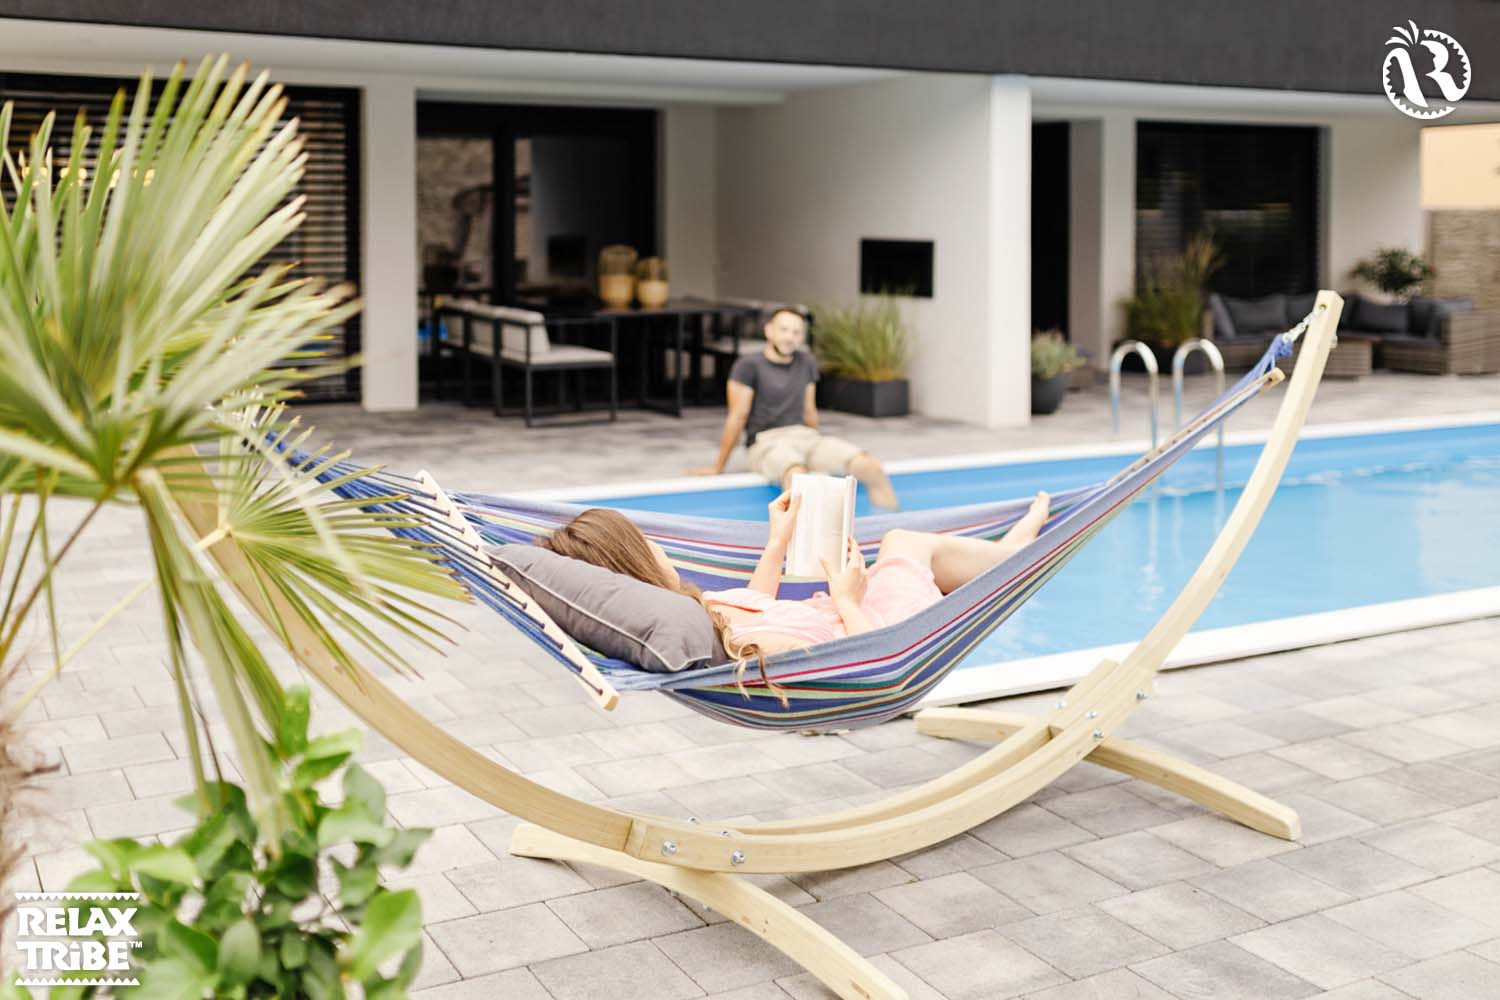 kronos-fsc-wood-stand-for-hammock-length-270-320cm-max-120kg-home-garden-weatherproof-natural-and-tonga-ocean